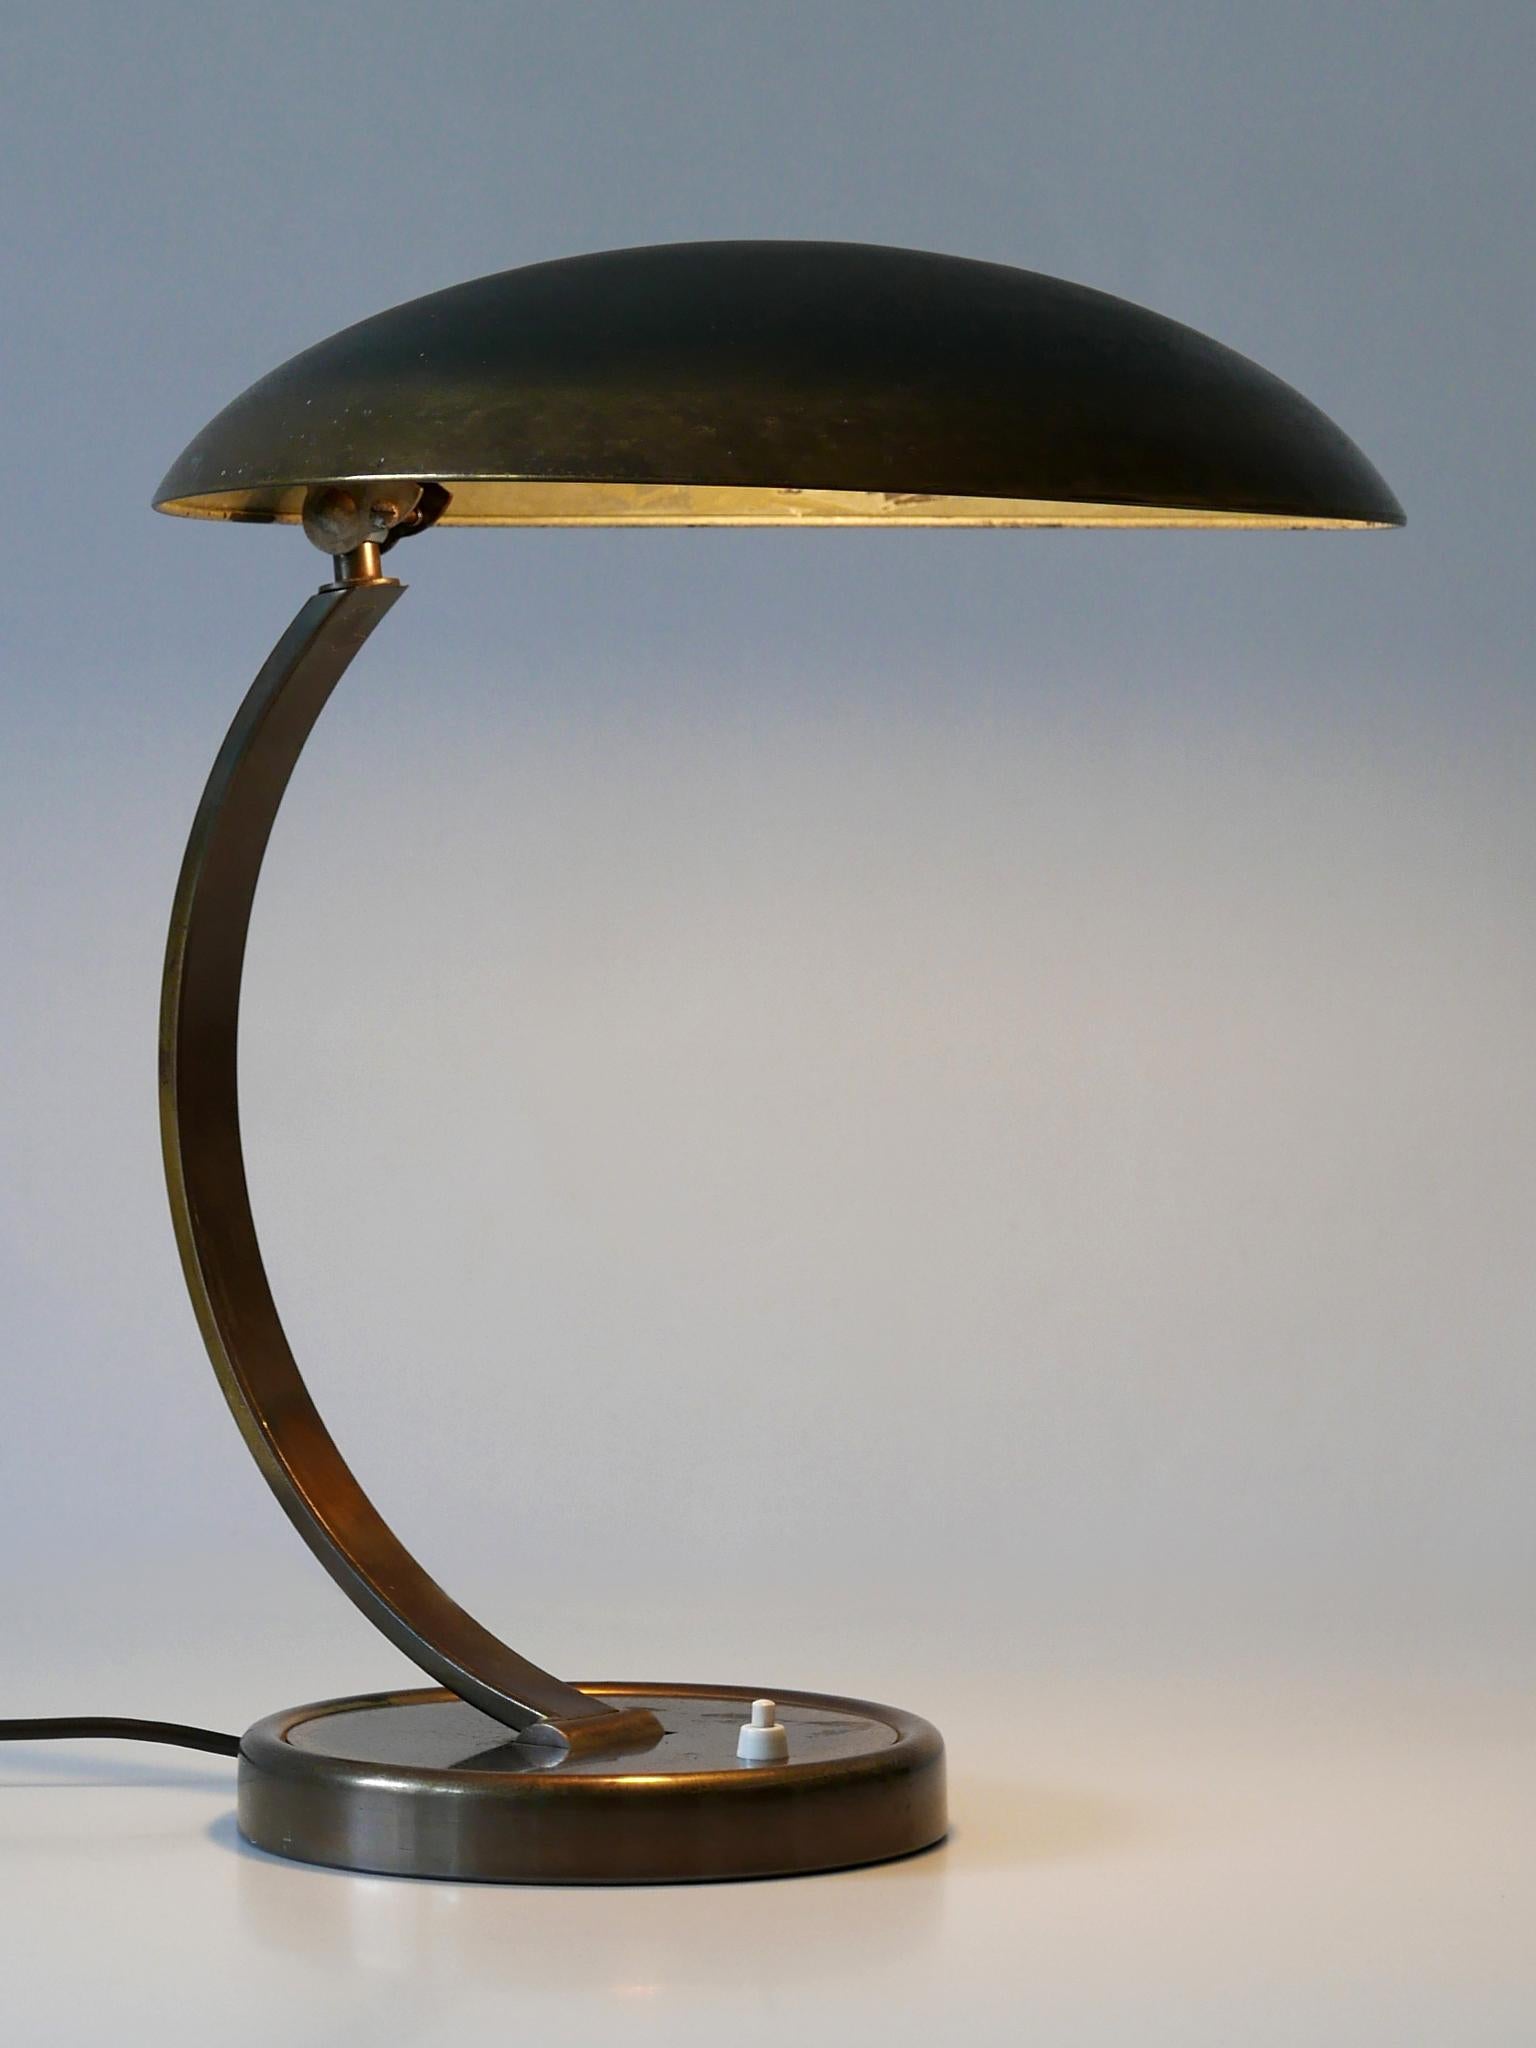 Patinated Articulated Mid-Century Modern Desk Lamp 6751 by Christian Dell for Kaiser Idell